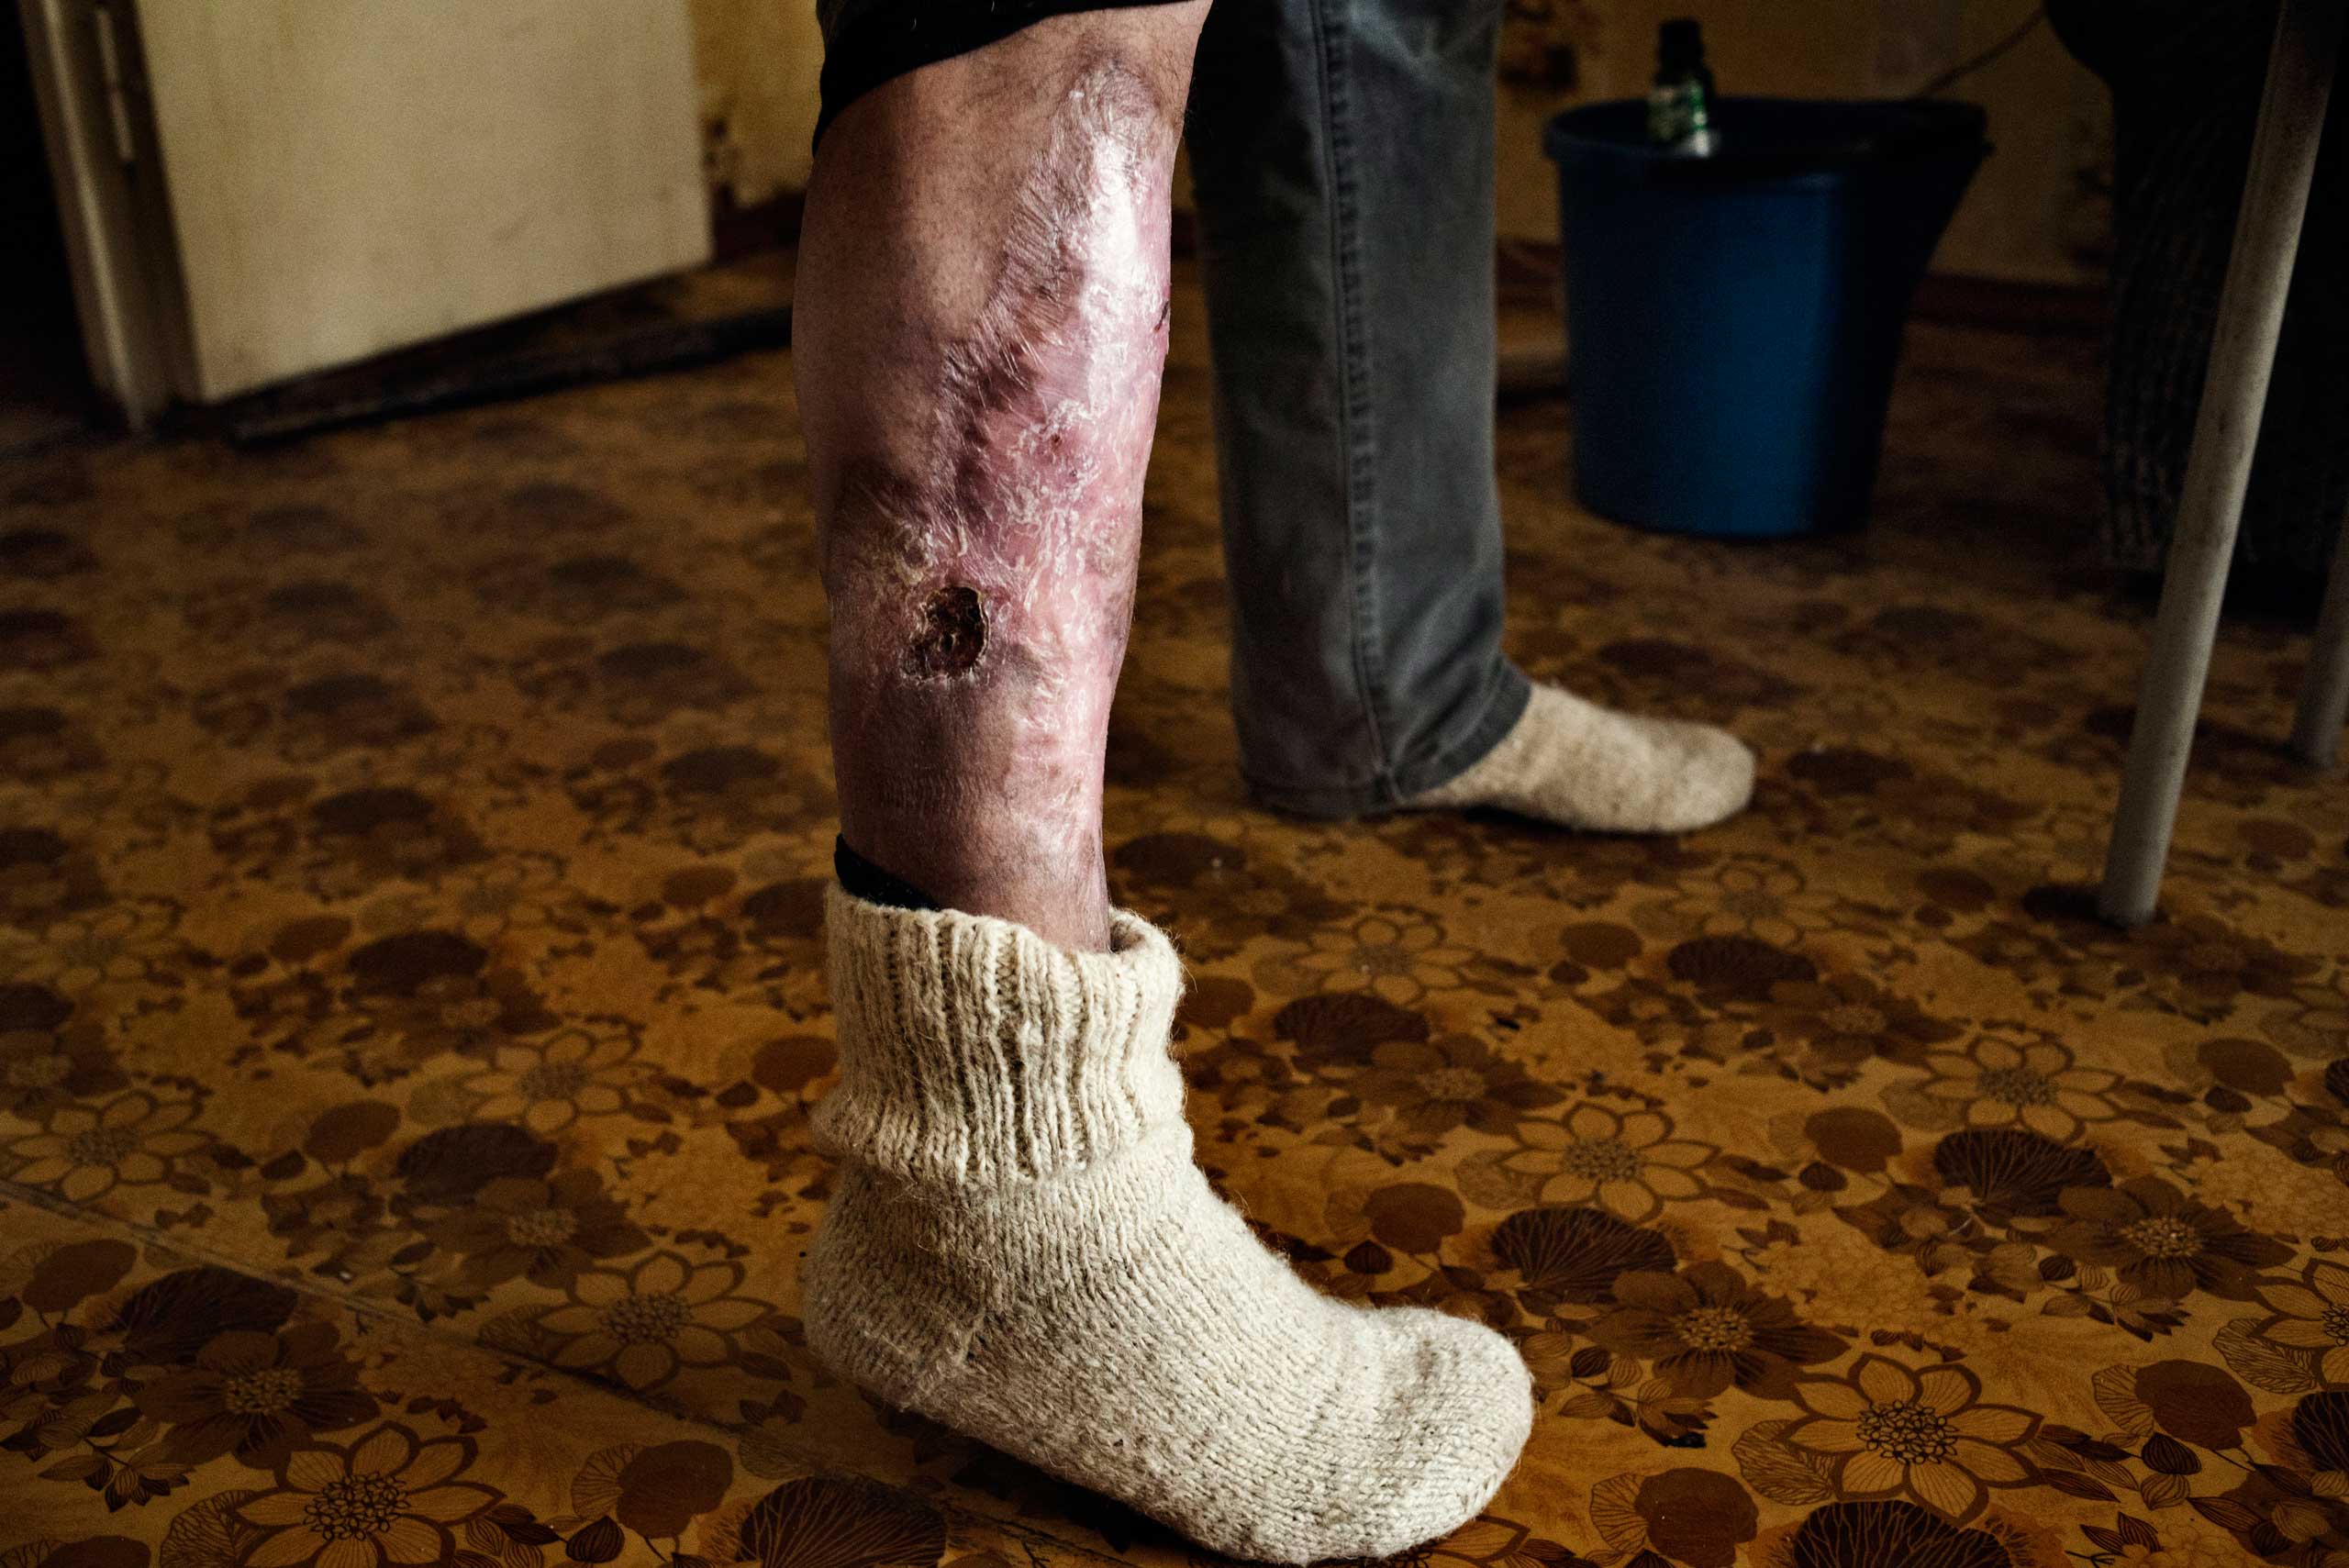 Pavel, 31 years old, shows the effects of the krokodil on his skin. The chemicals used to prepare krokodil cause deep wounds and sores.